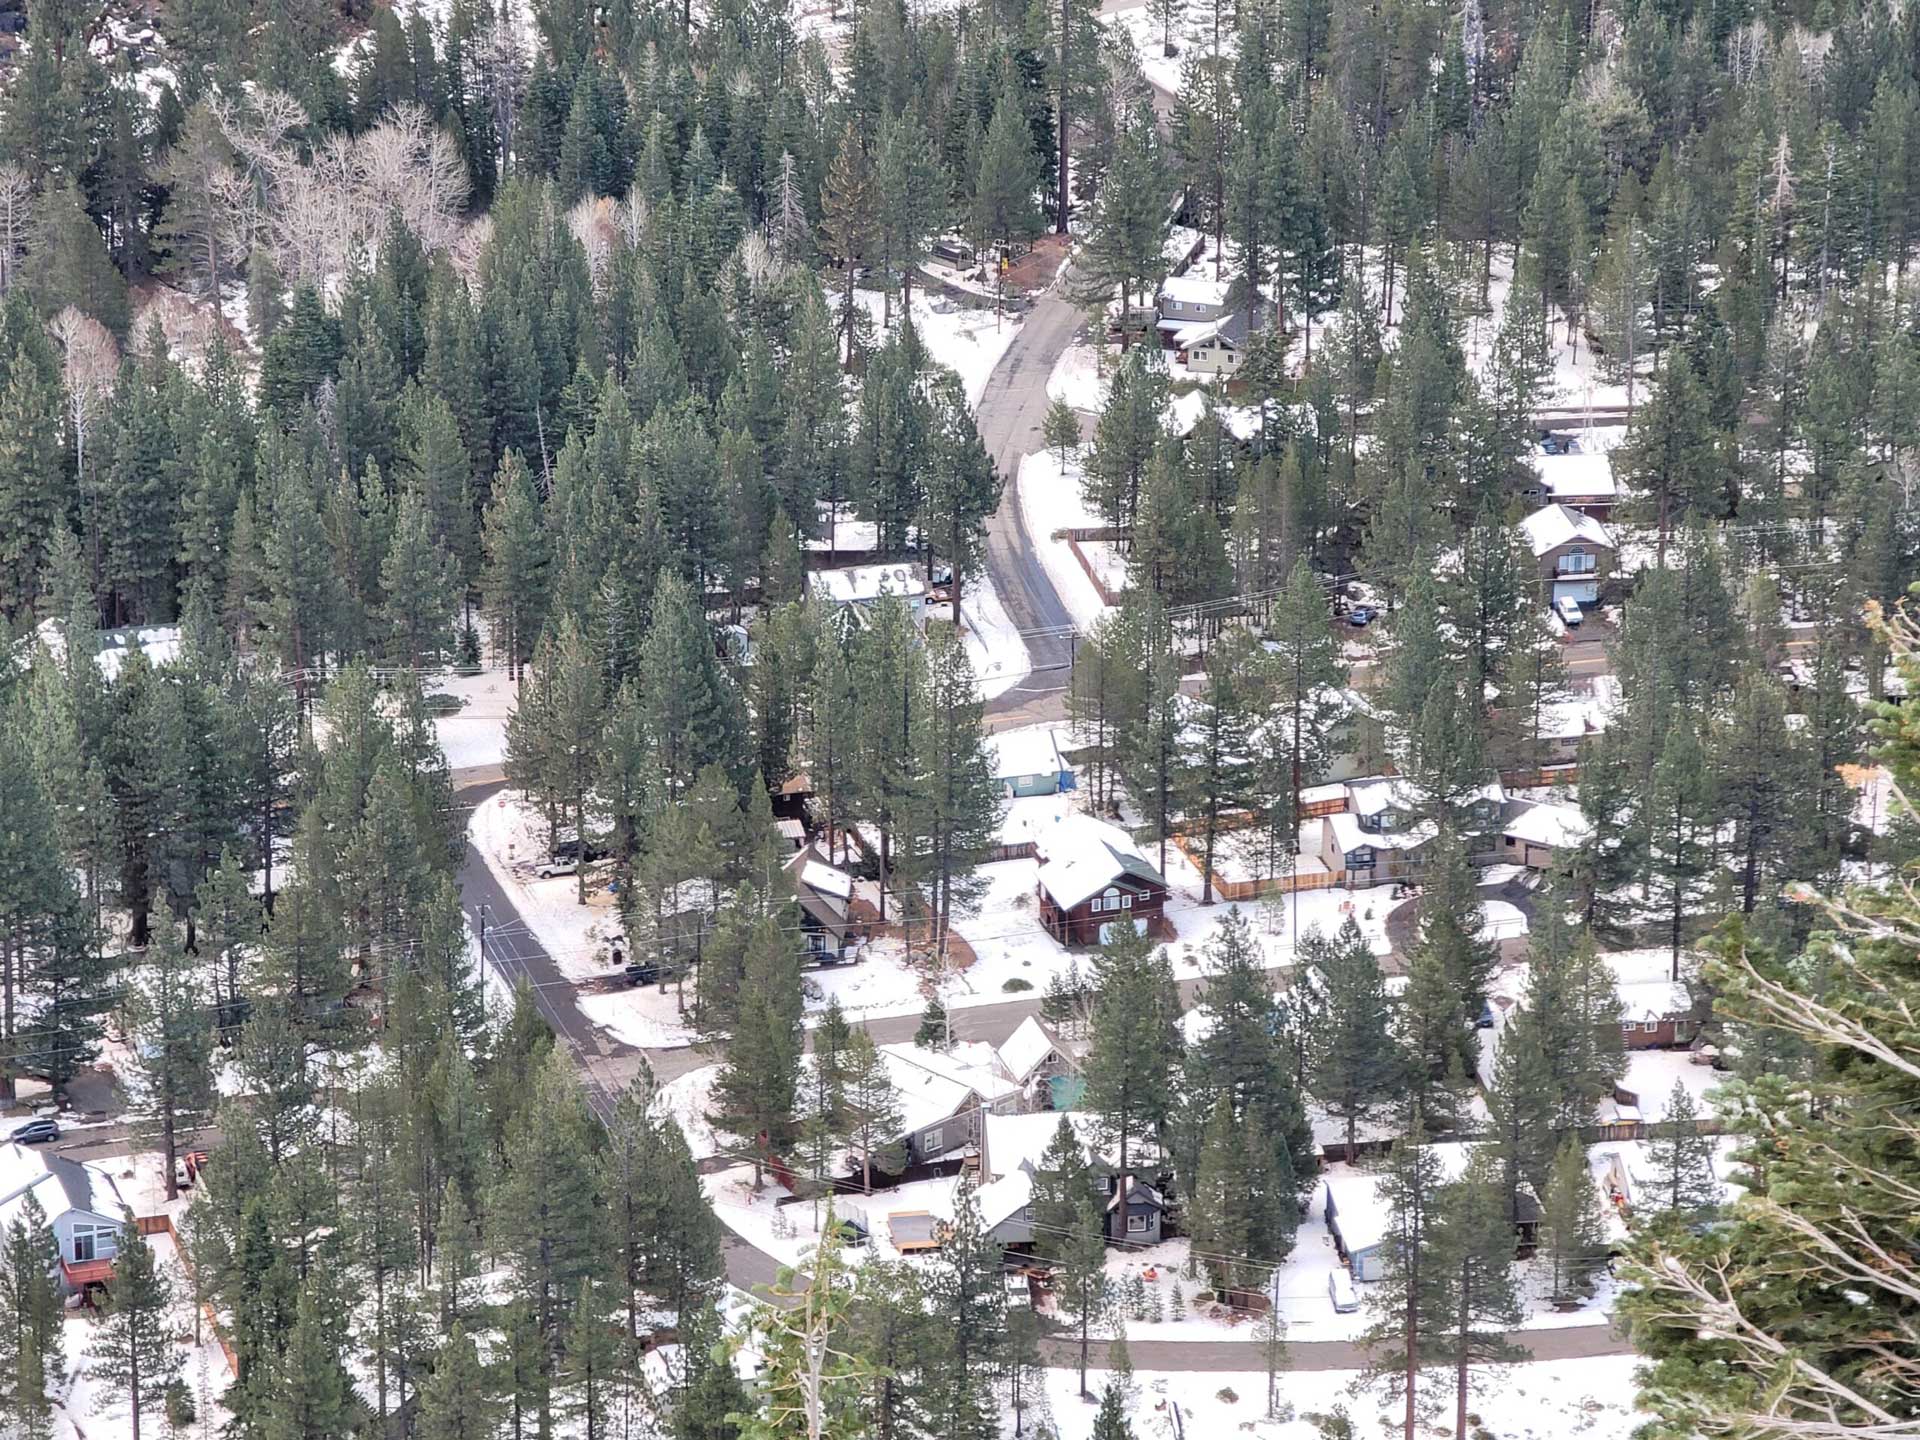 Aerial view of snow services performed